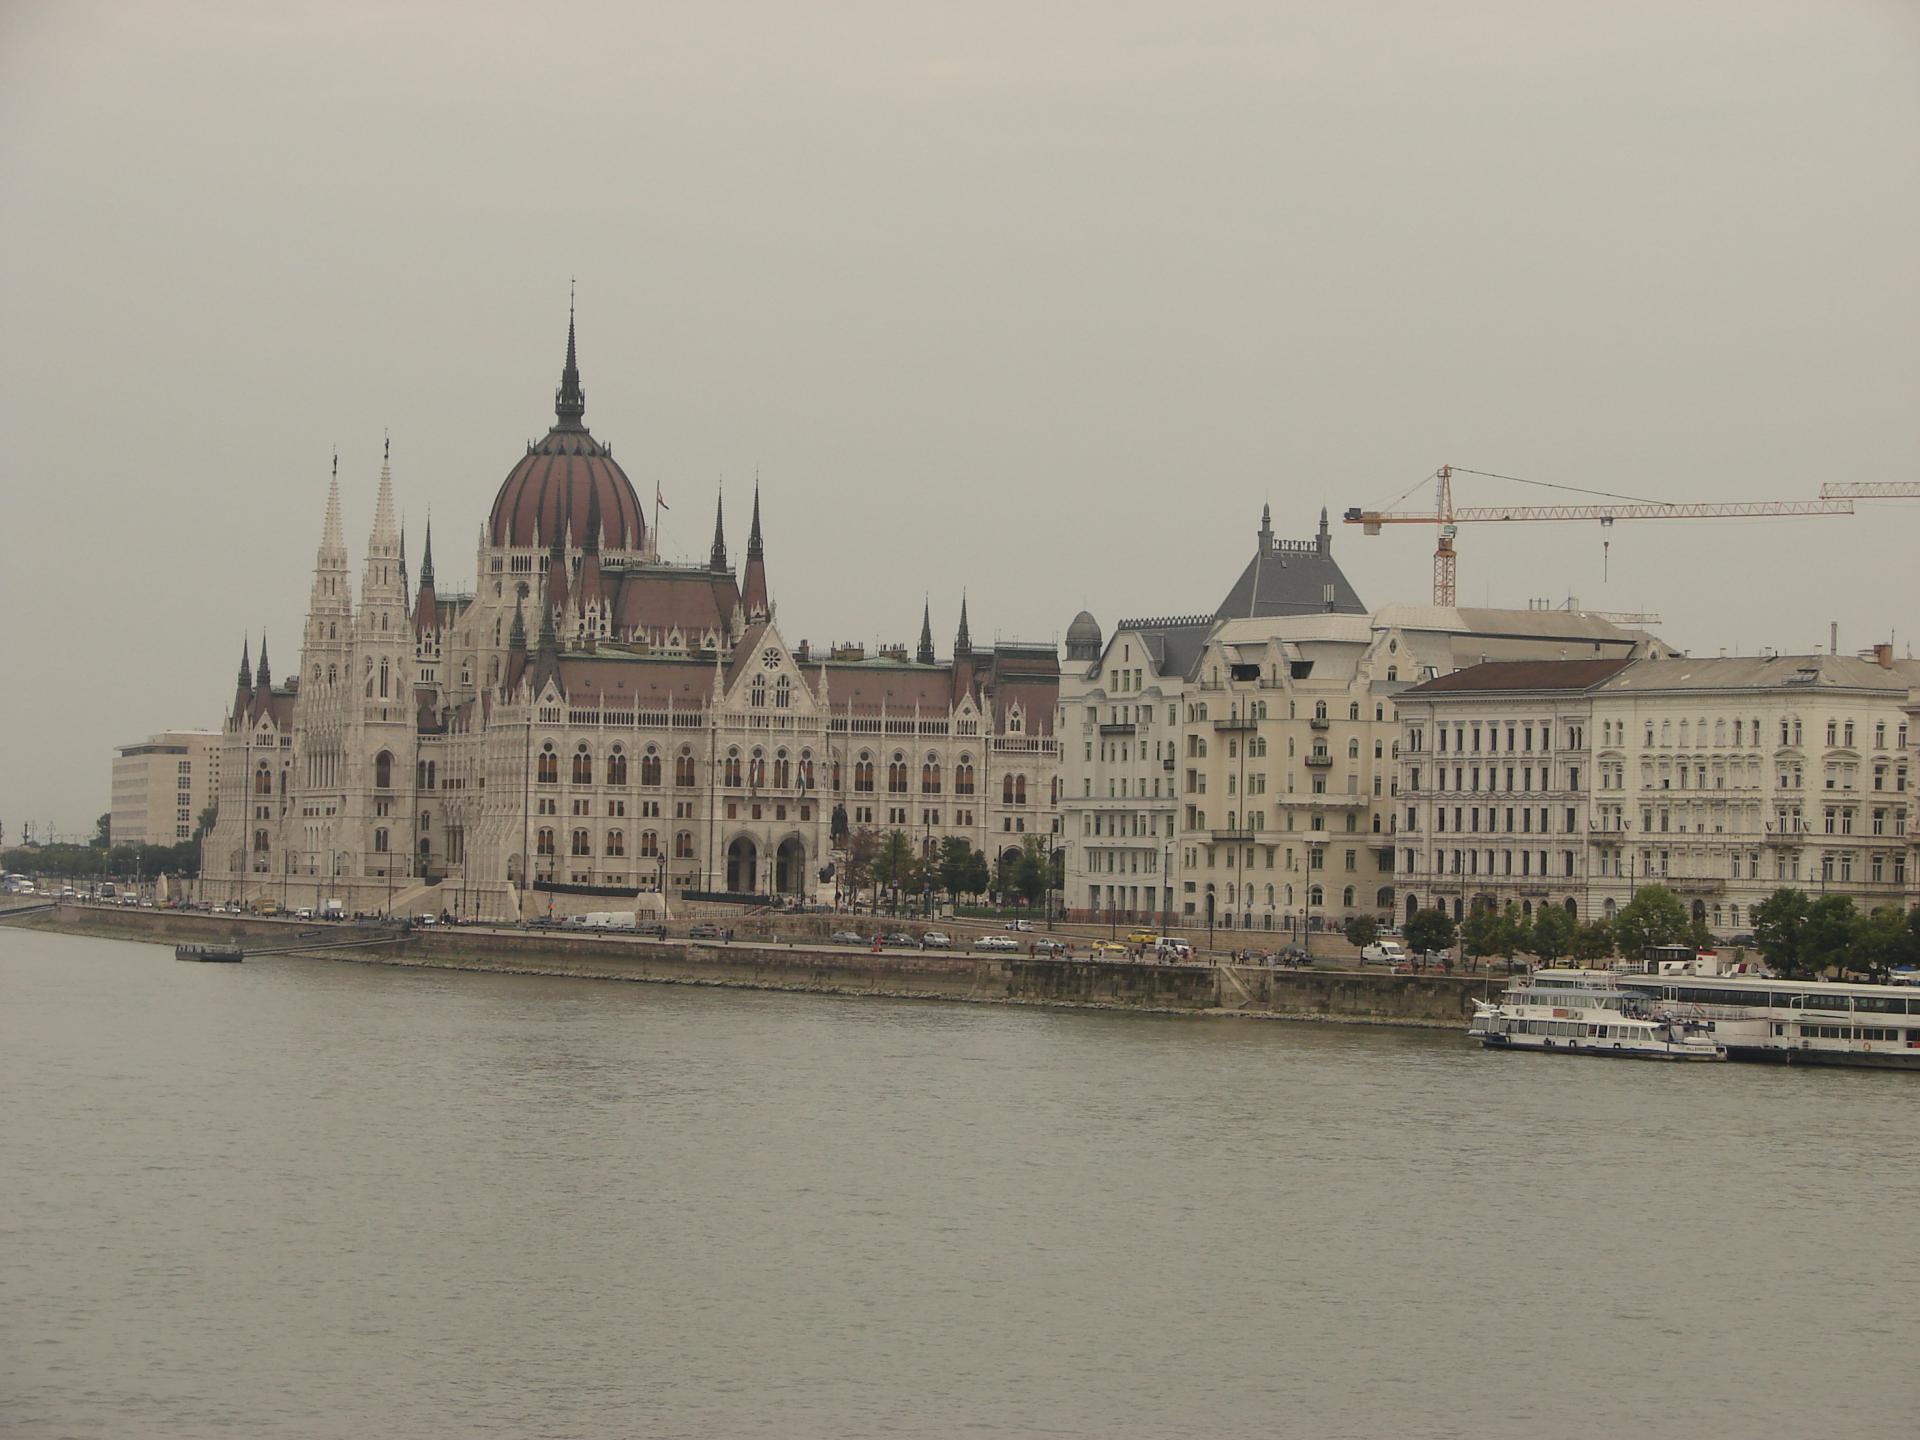 Half a day in Budapest - what to see?